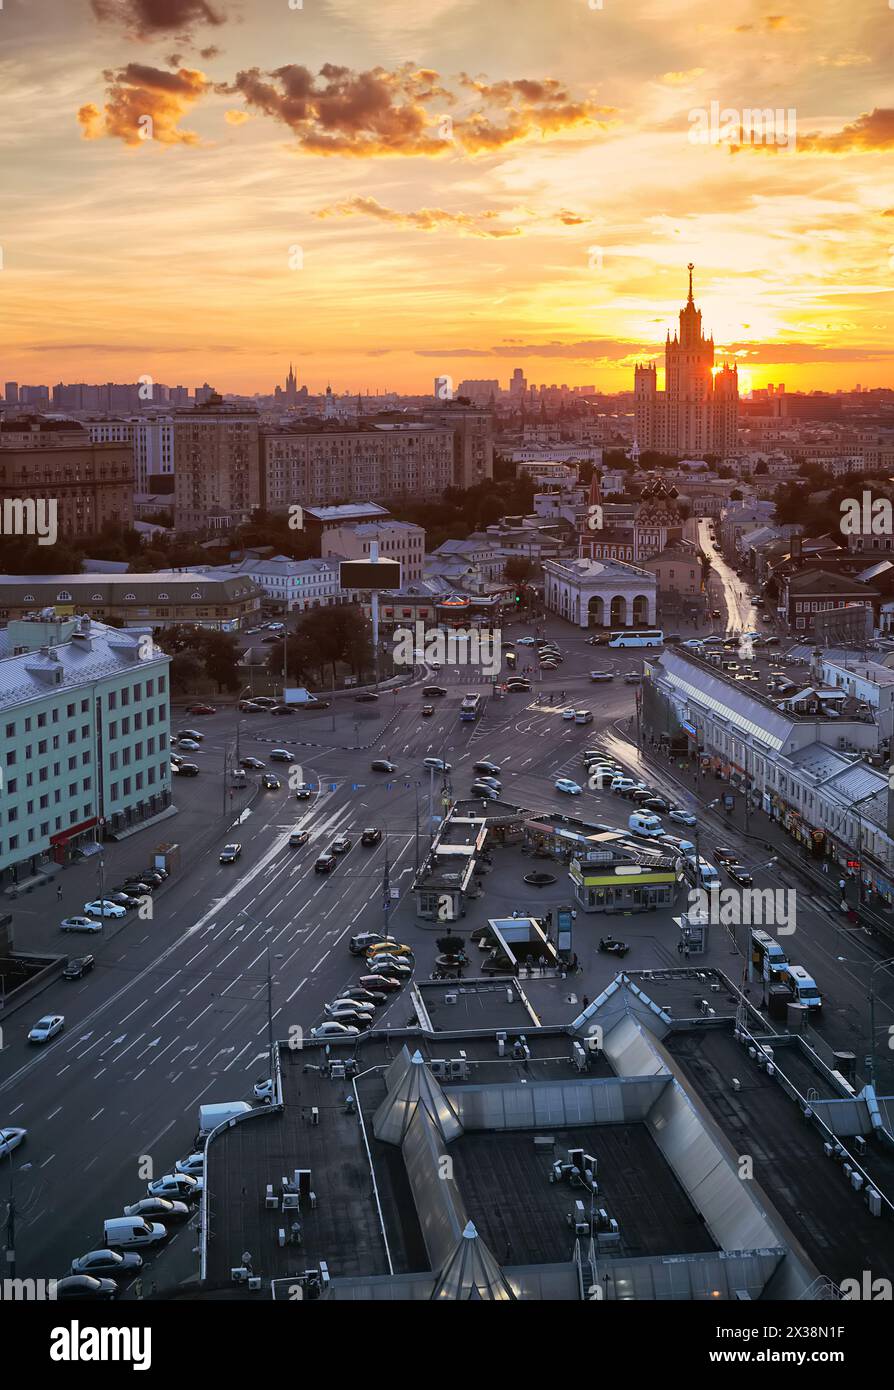 Square, road, panorama of city with stalin skyscraper during sunrise in Moscow, Russia Stock Photo